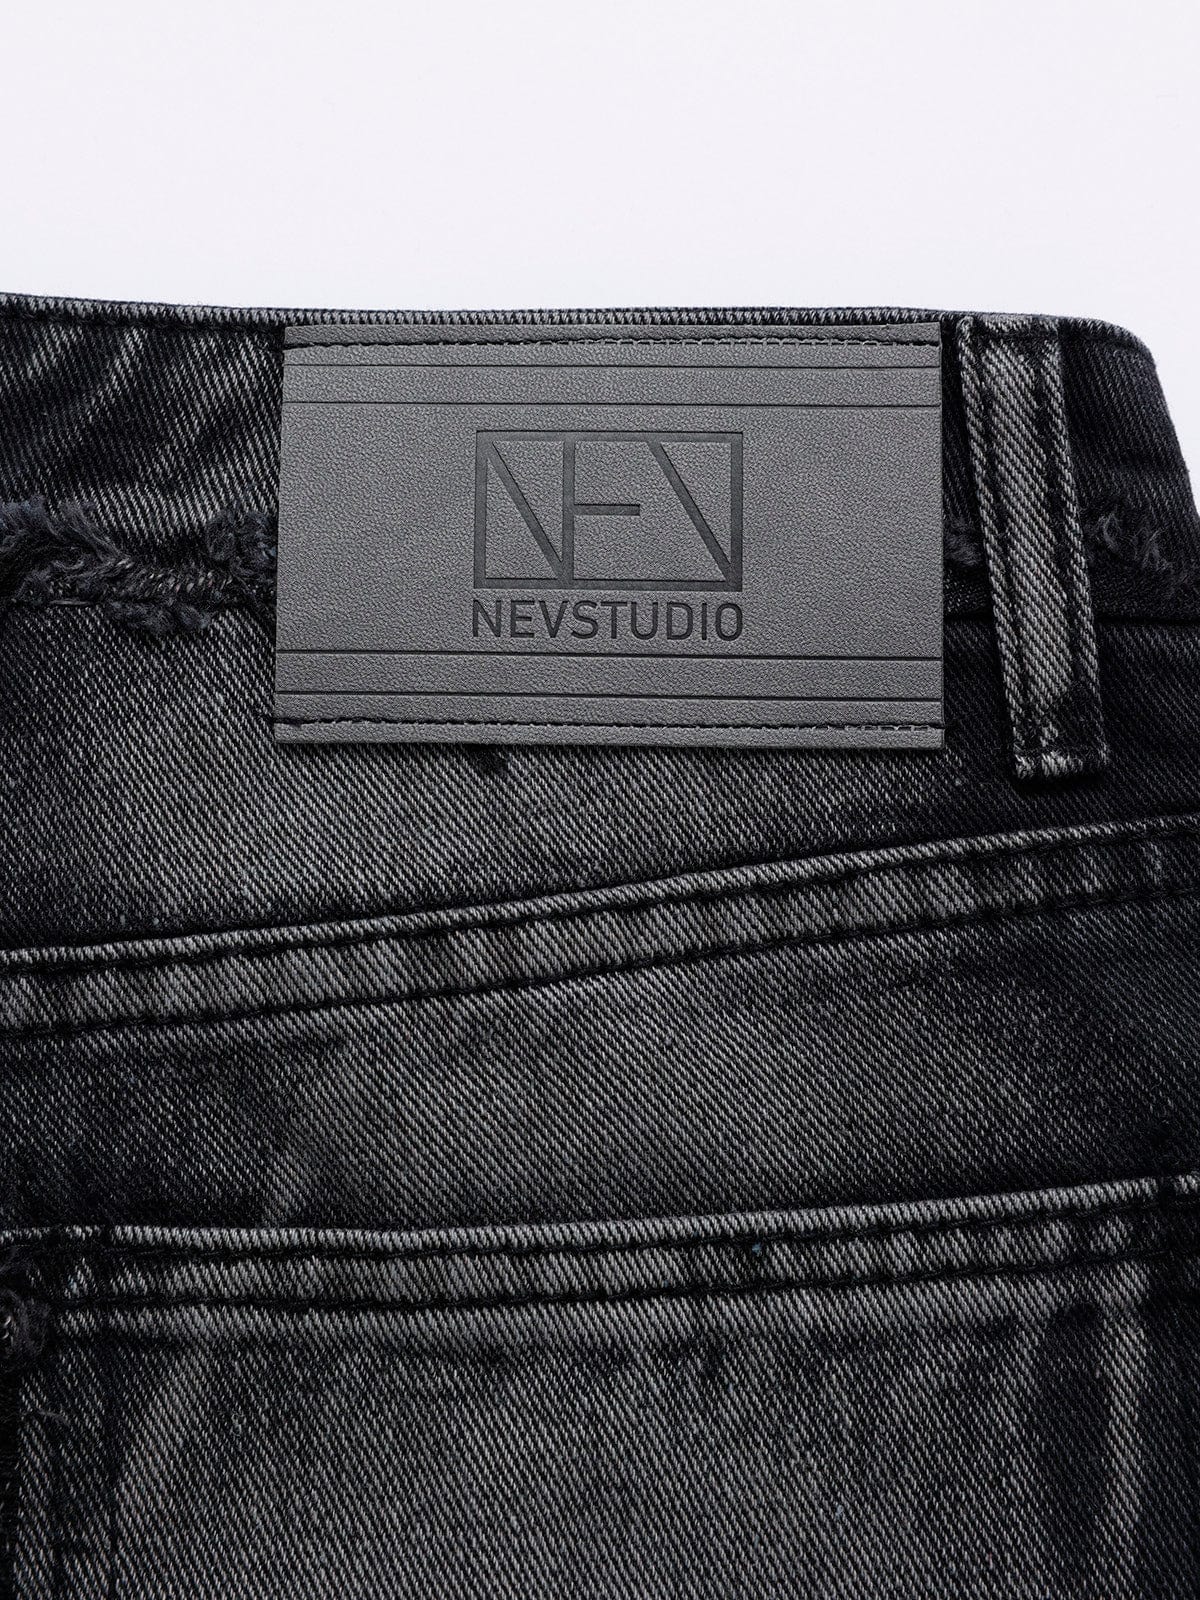 NEV Spider Silhouette Pattern Stitching Jeans